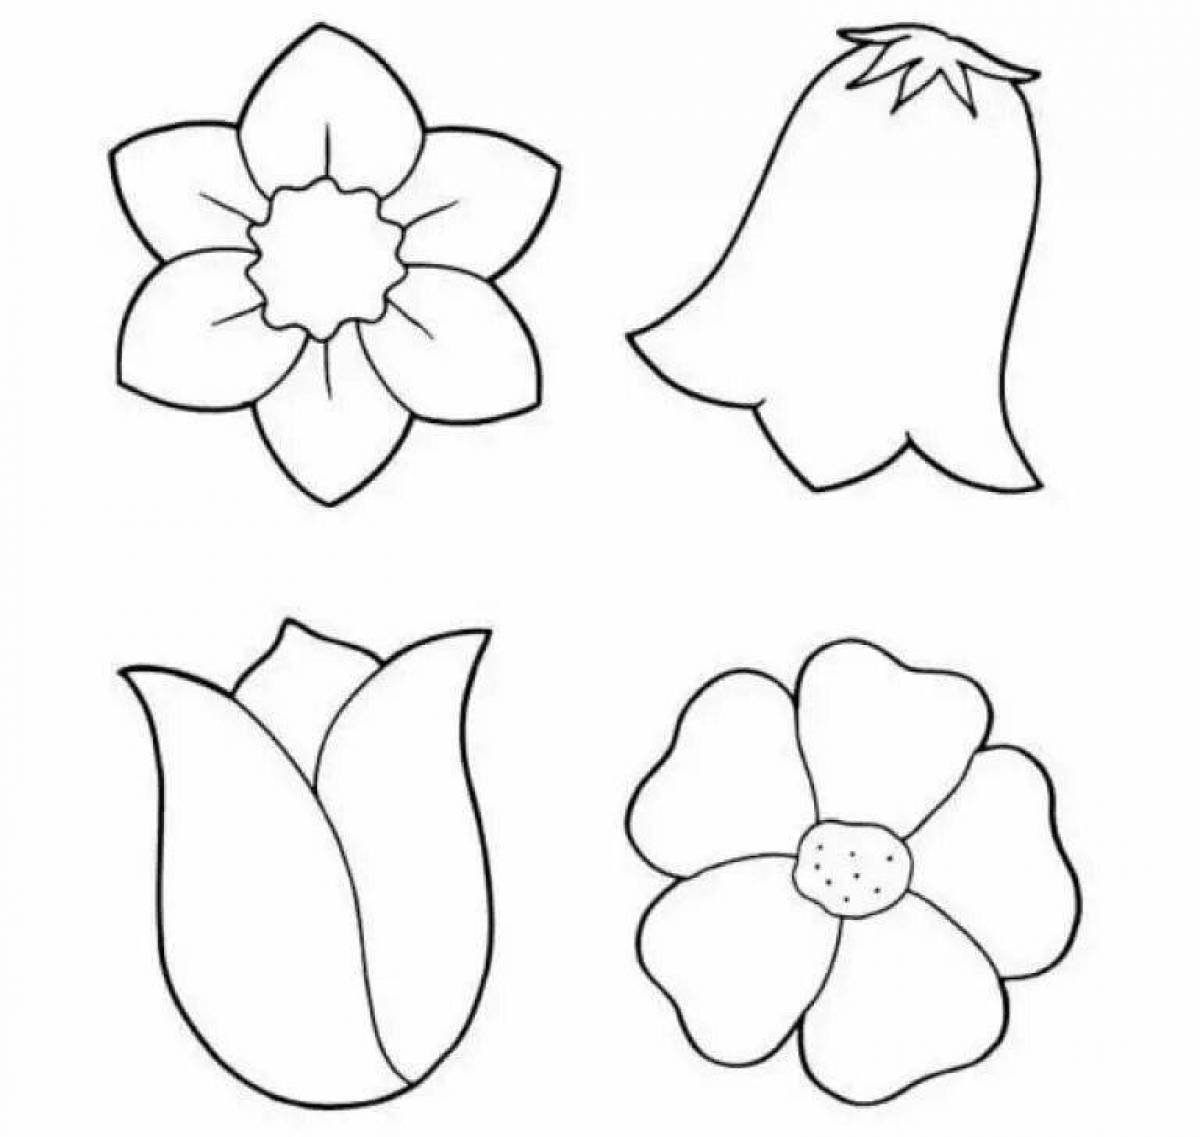 Fancy floral pattern coloring page